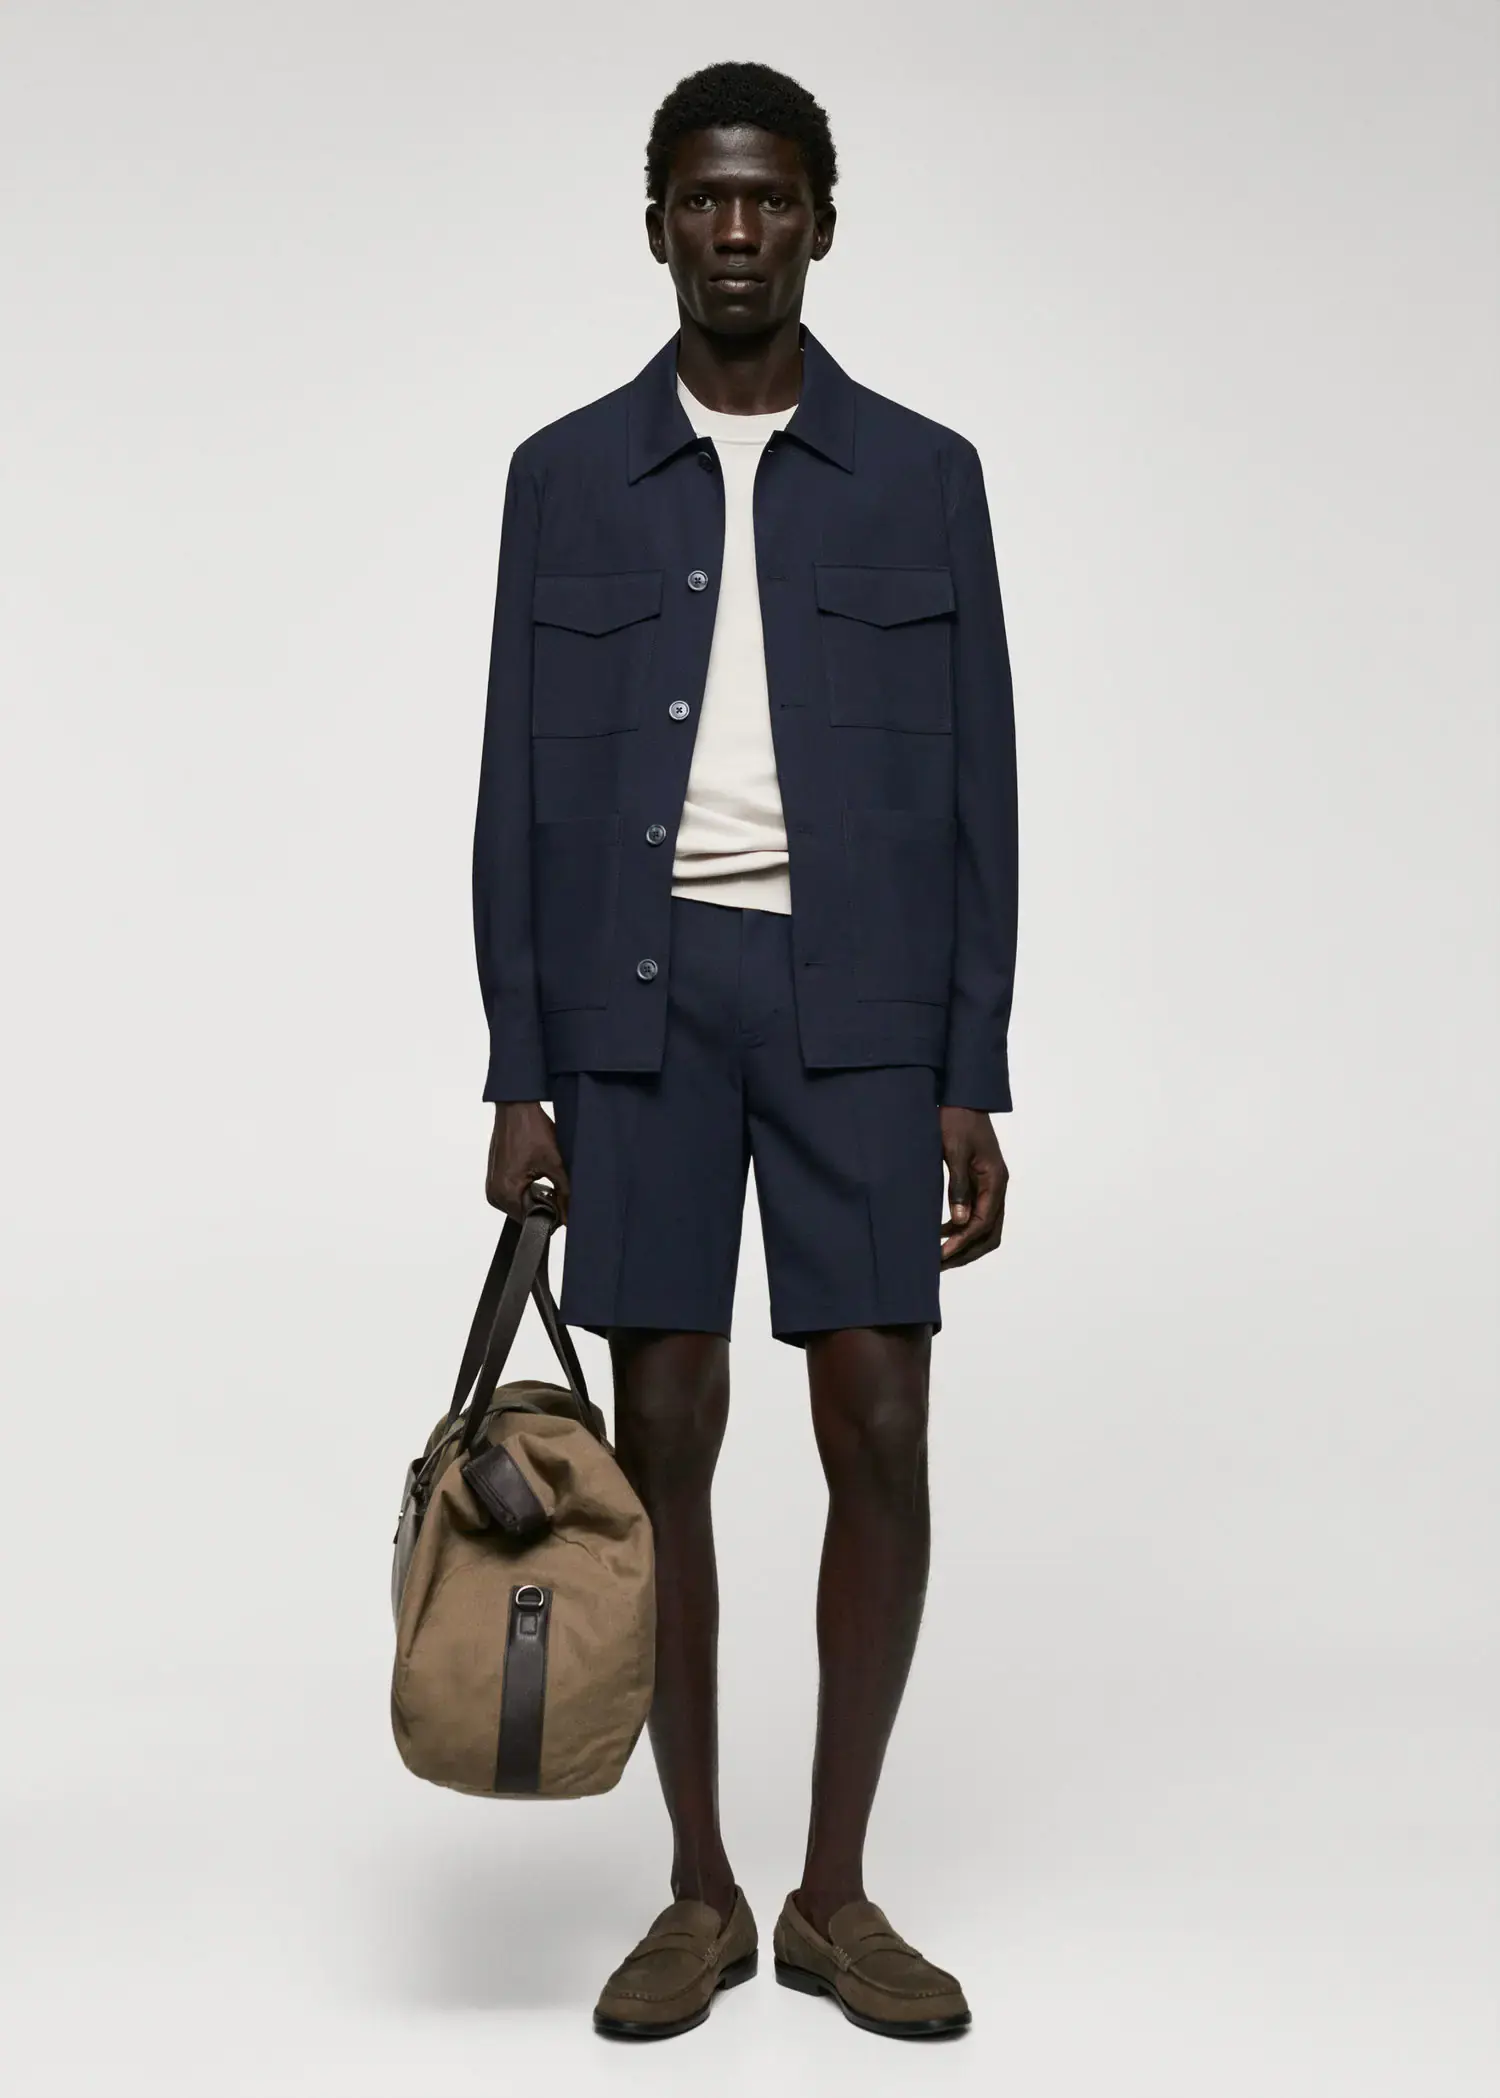 Mango Lightweight pocket jacket. a man in shorts and a jacket holding a bag. 